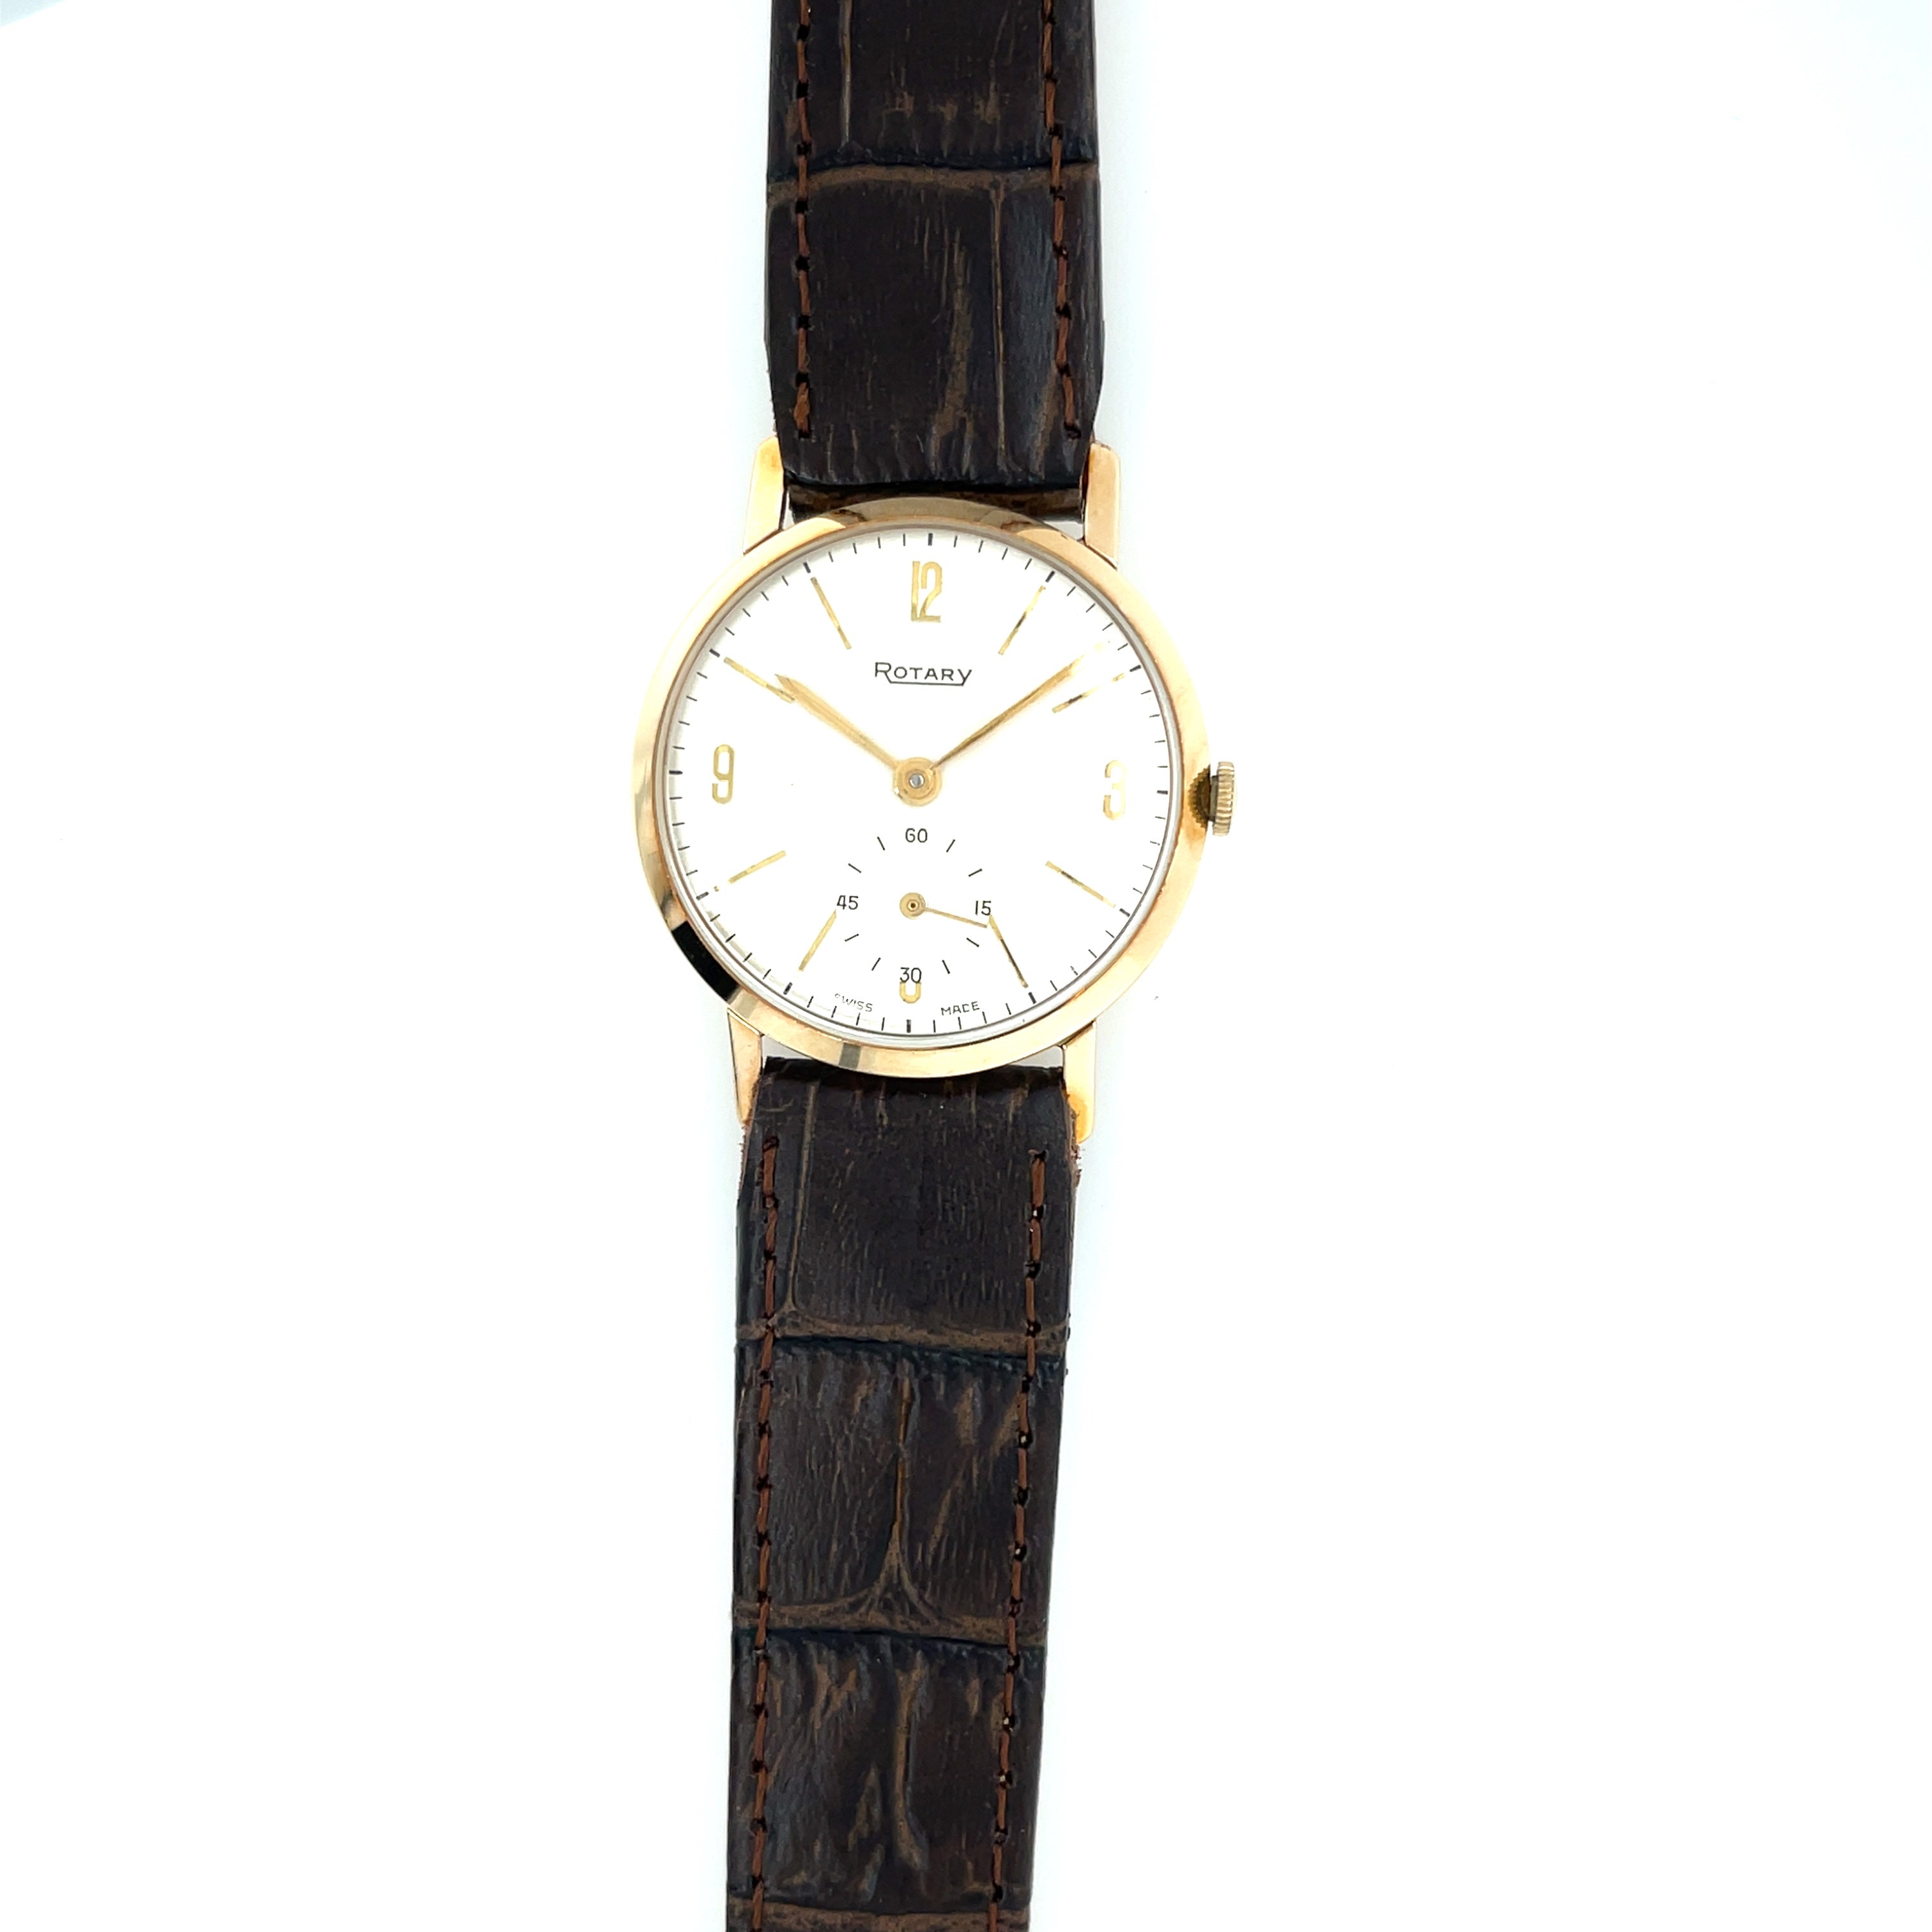 ROTARY 9ct Yellow Gold Vintage Watch Calibre 435 circa 1958 SOLD